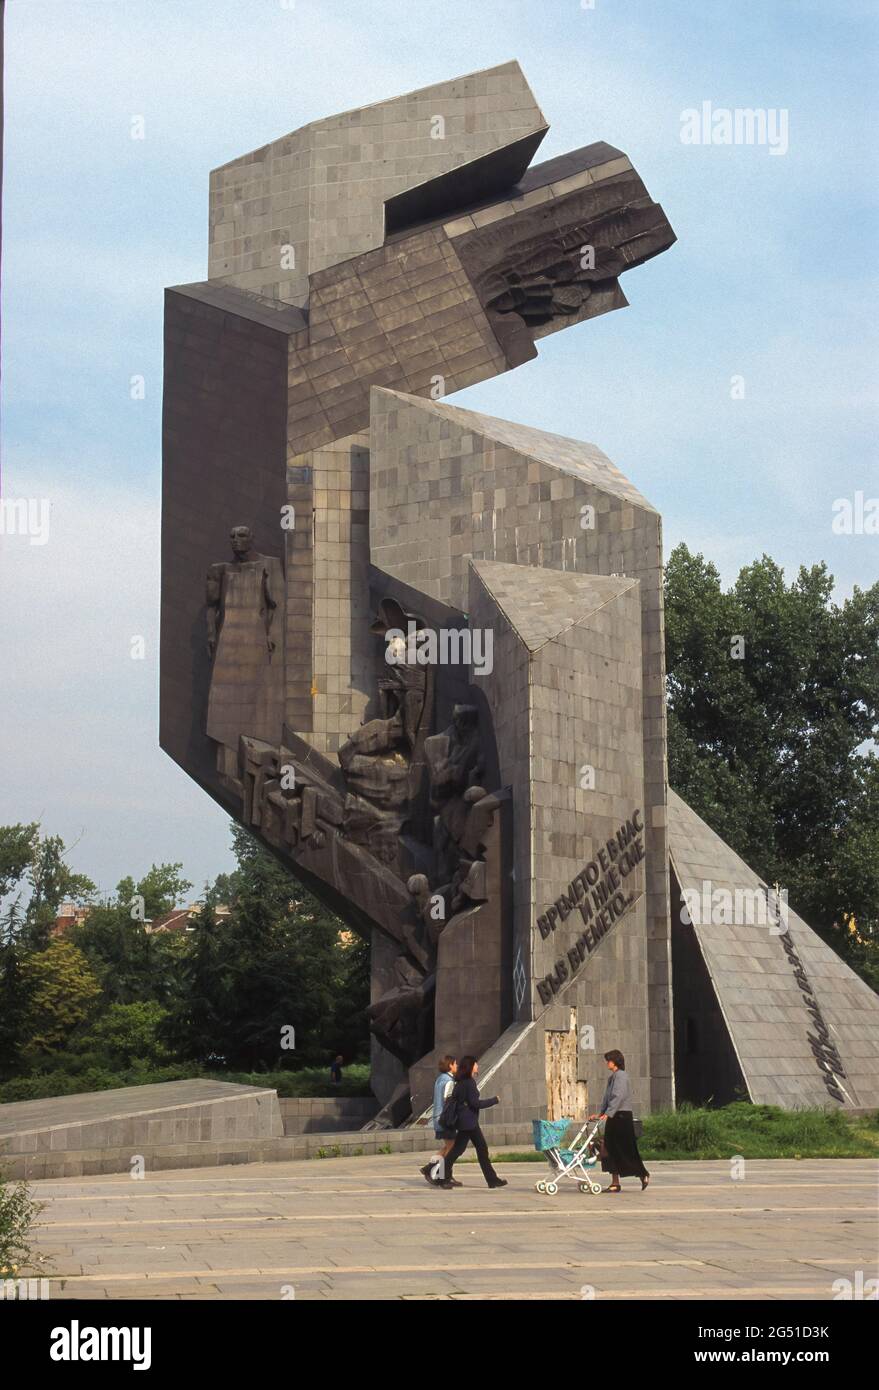 SOFIA, BULGARIA, JULY 1995 - The 1300 Years of Bulgaria Monument in Yuzhen Park. It was demolished in 2017. Stock Photo